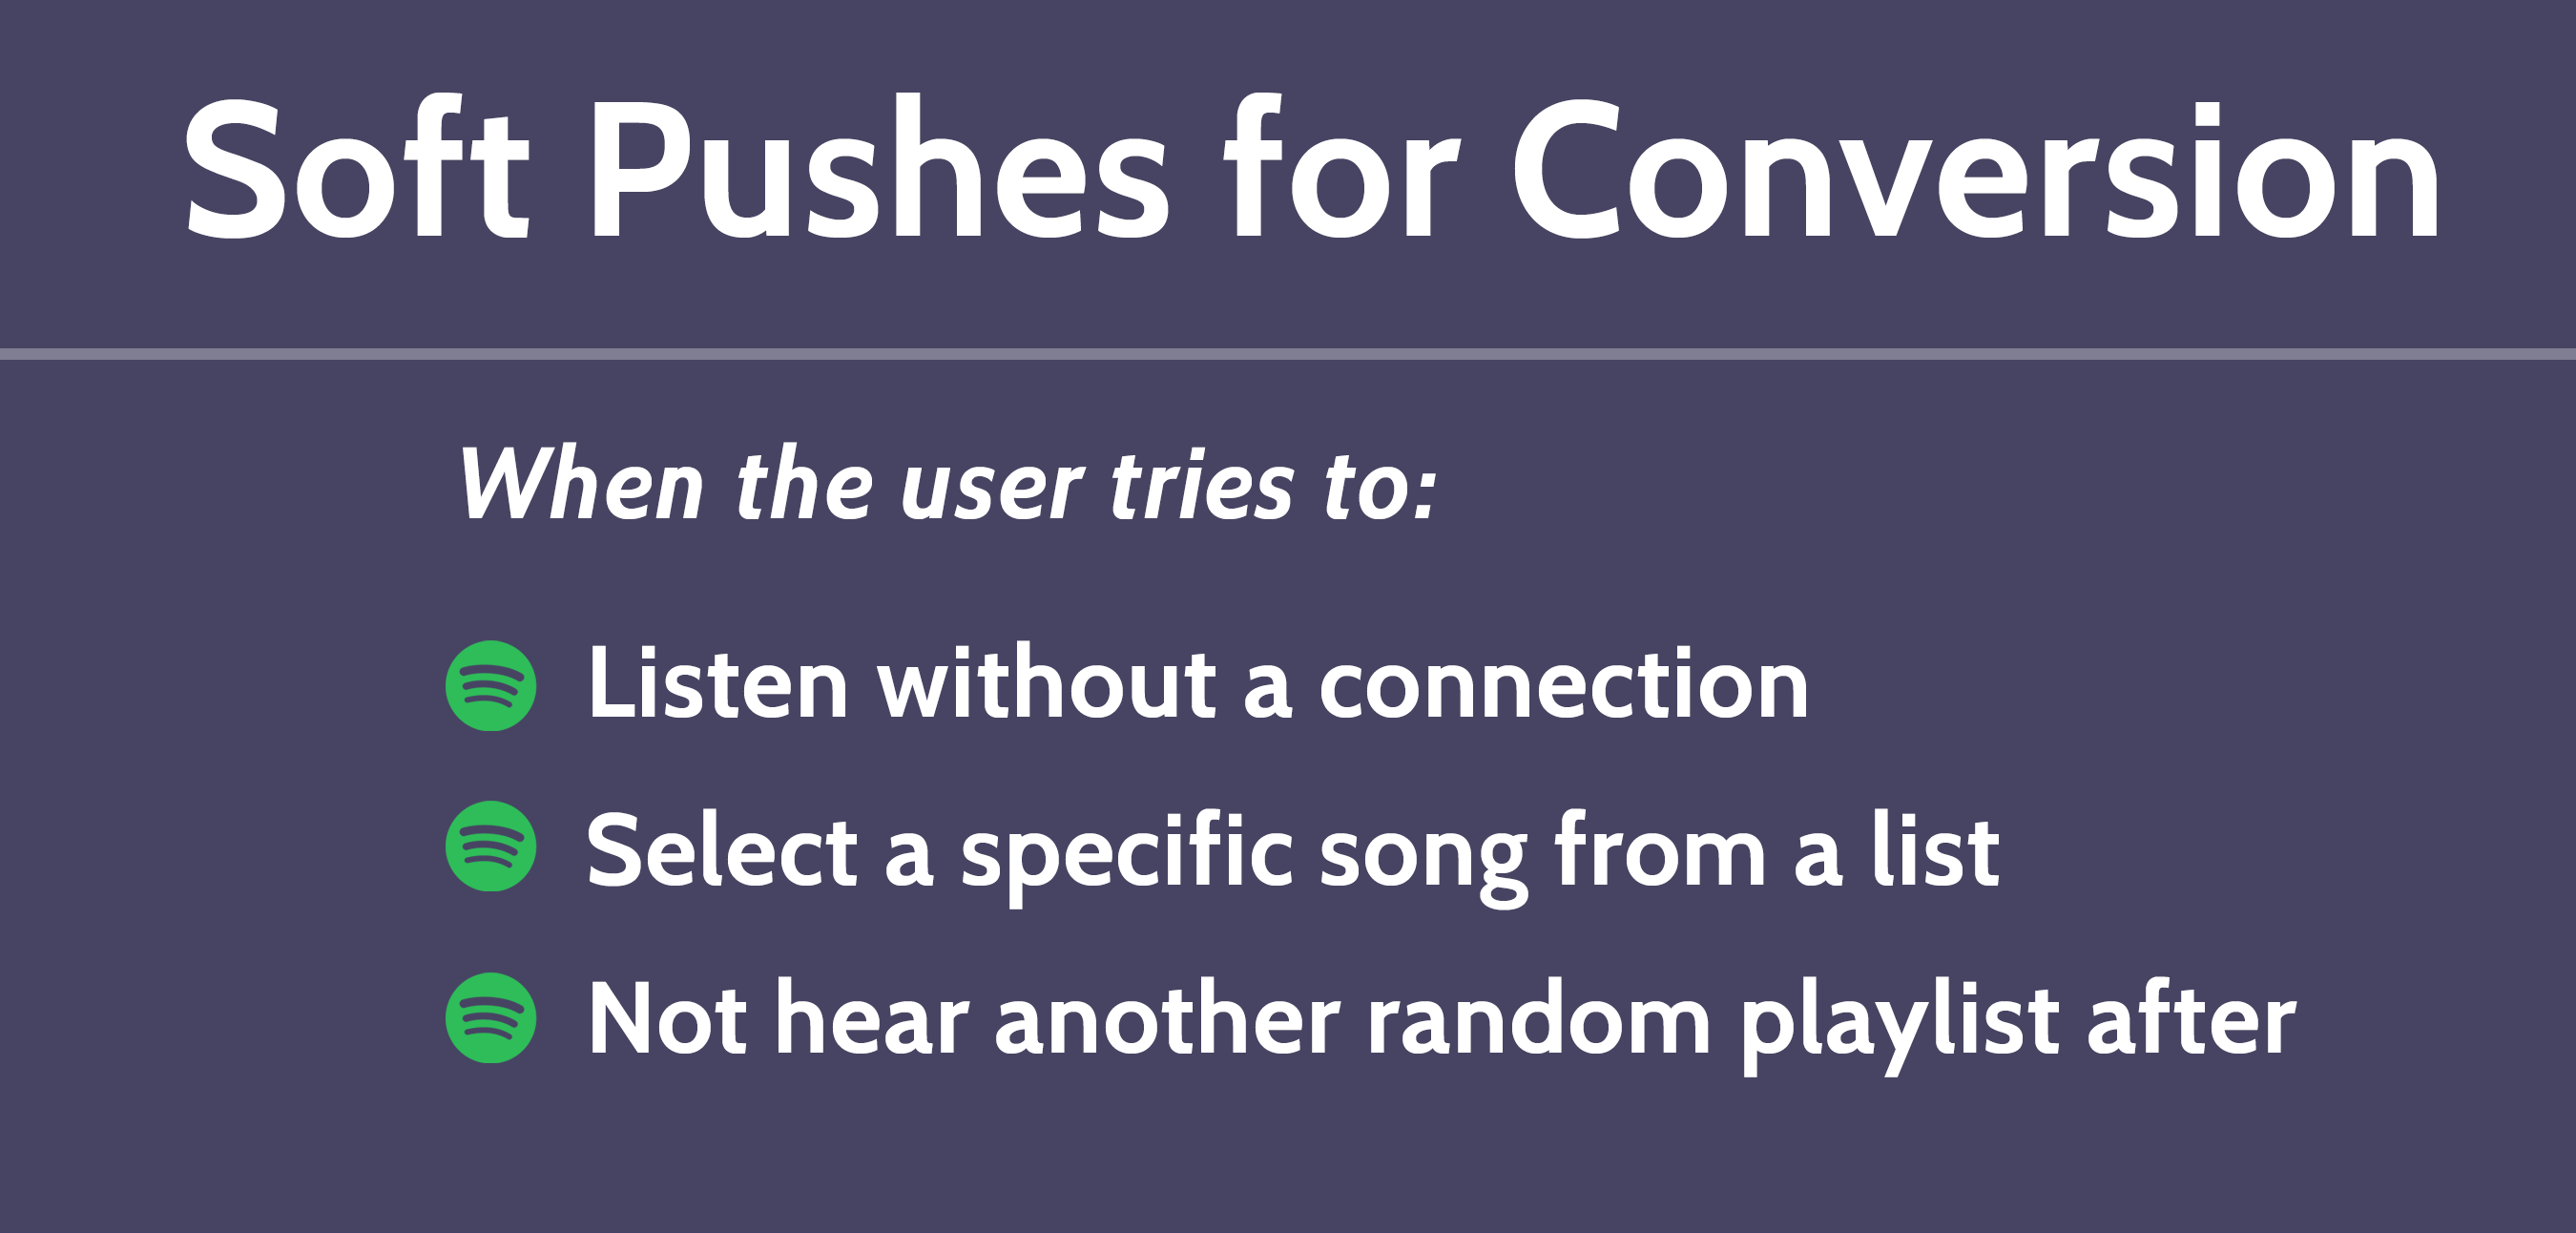 Spotify Soft Conversion Pushes